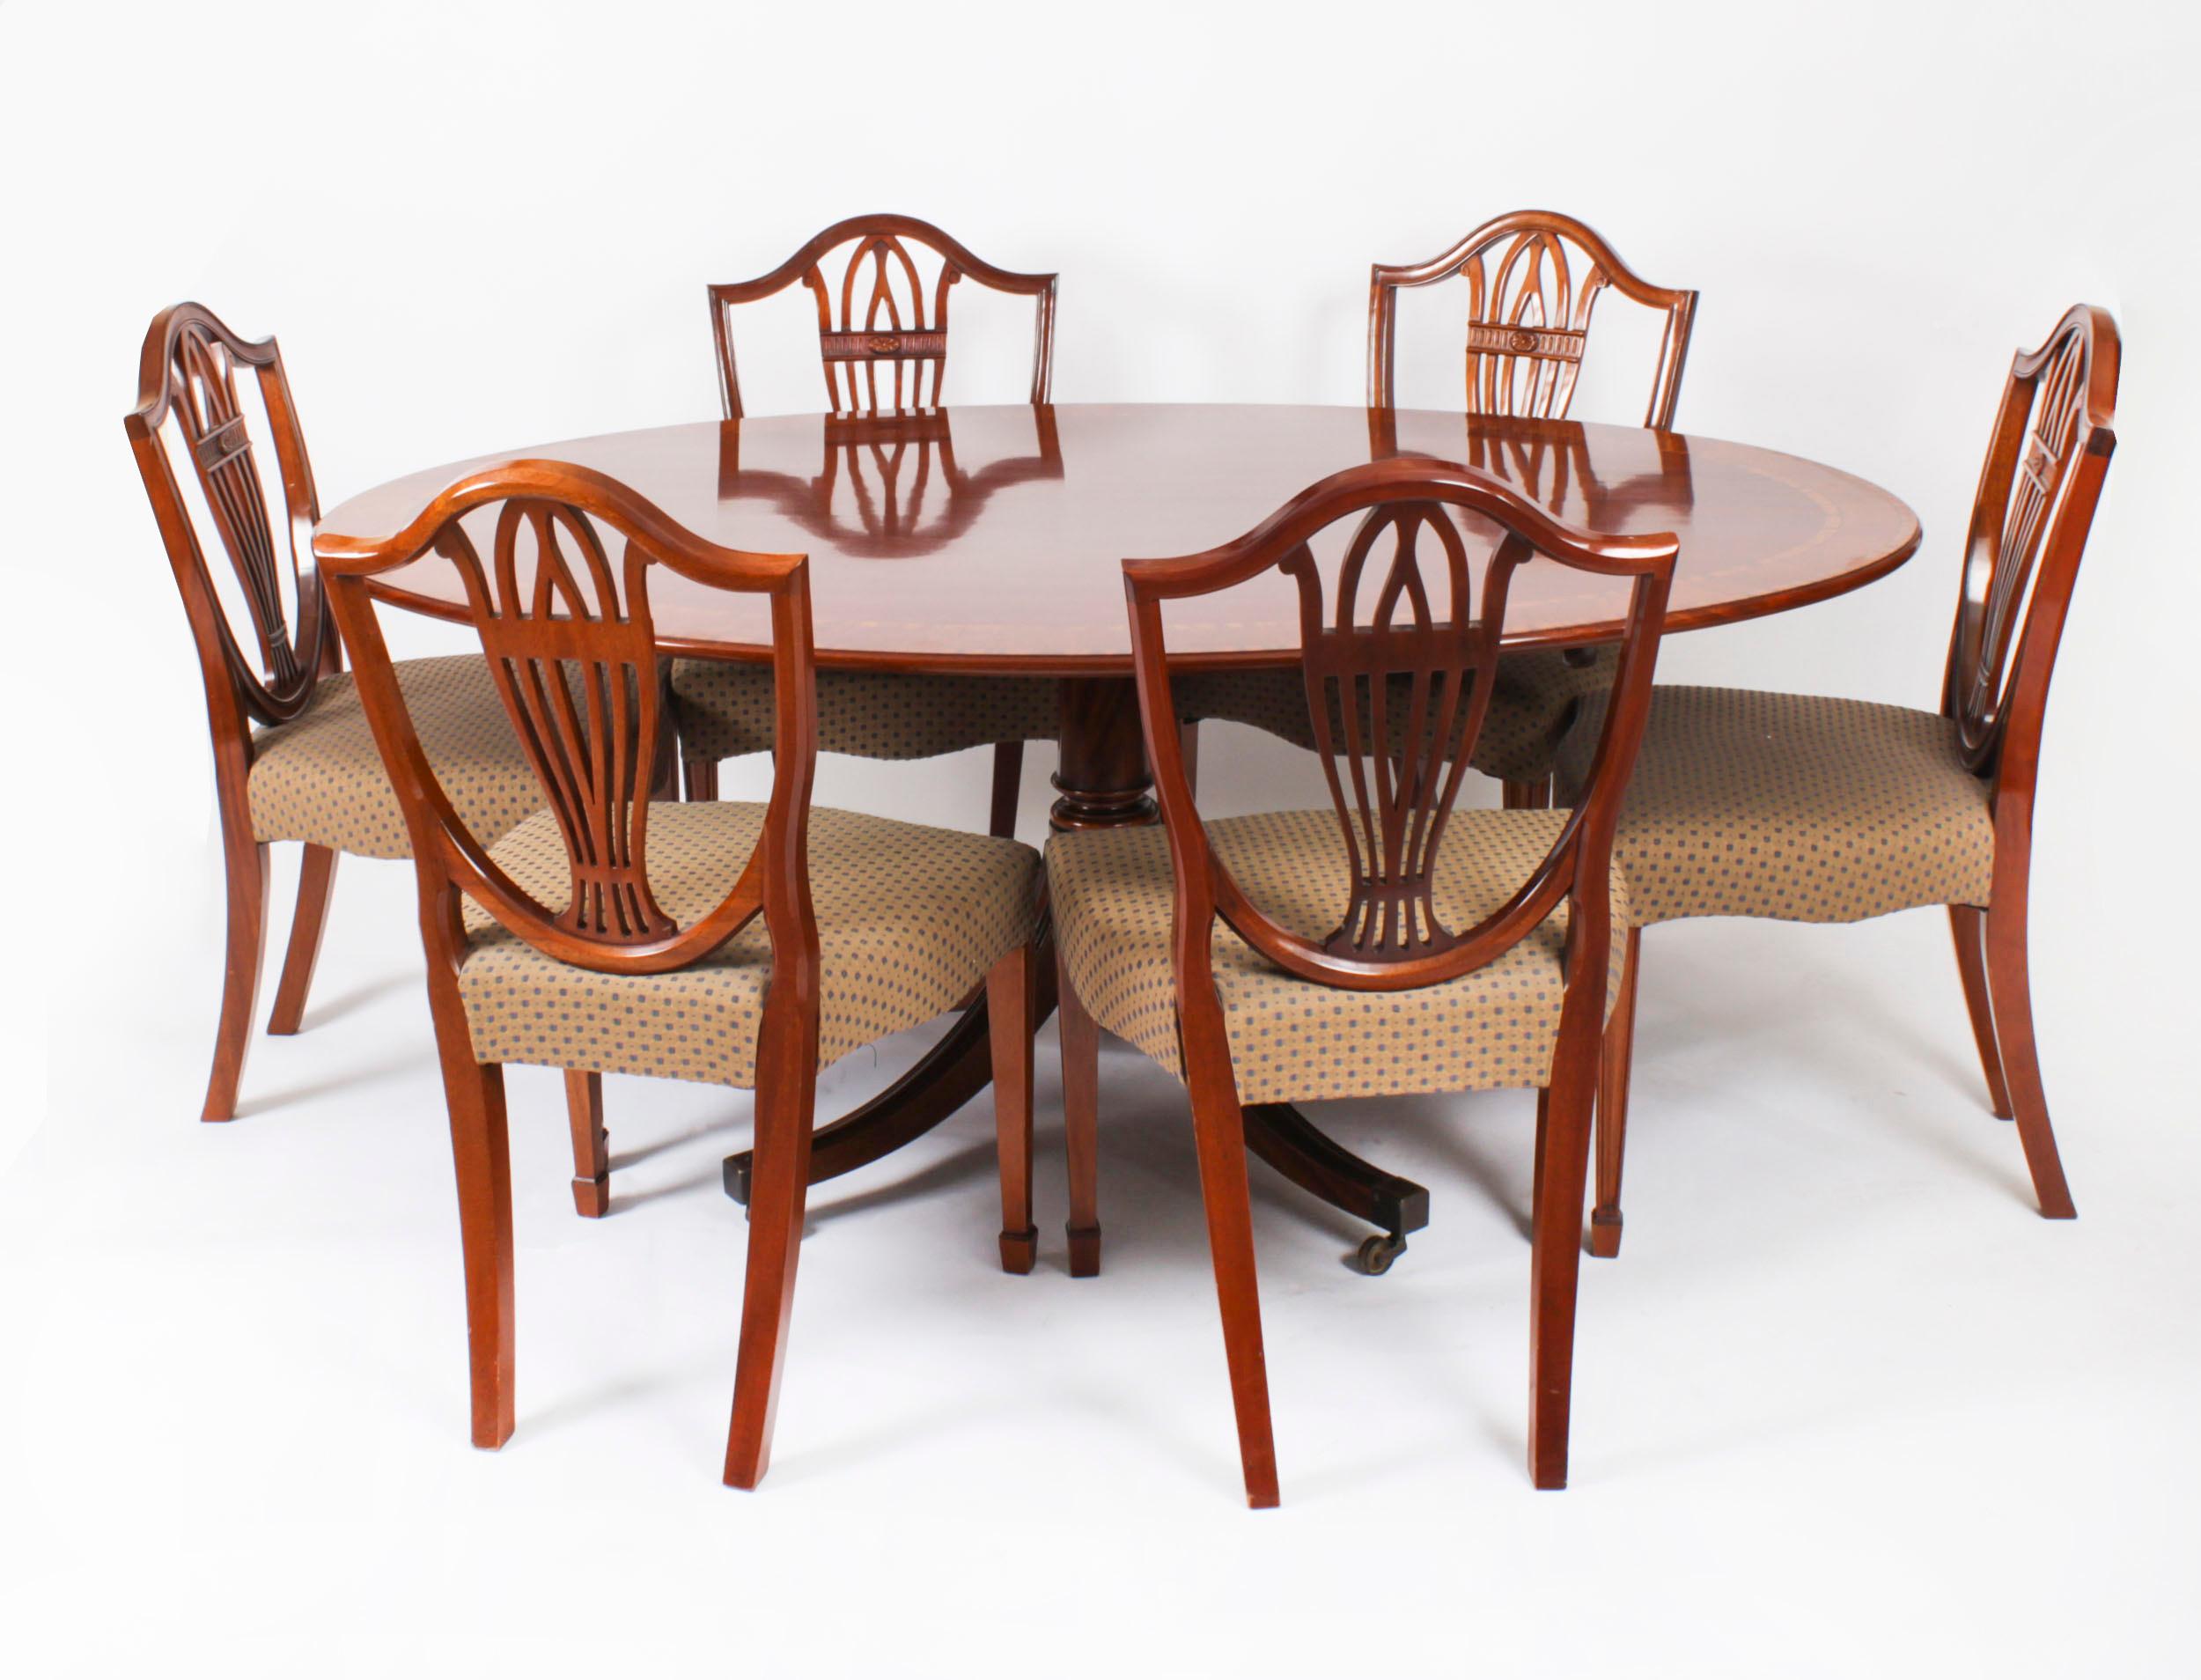 Vintage Oval Regency Revival Dining Table & 6 Chairs by William Tillman 20th 14